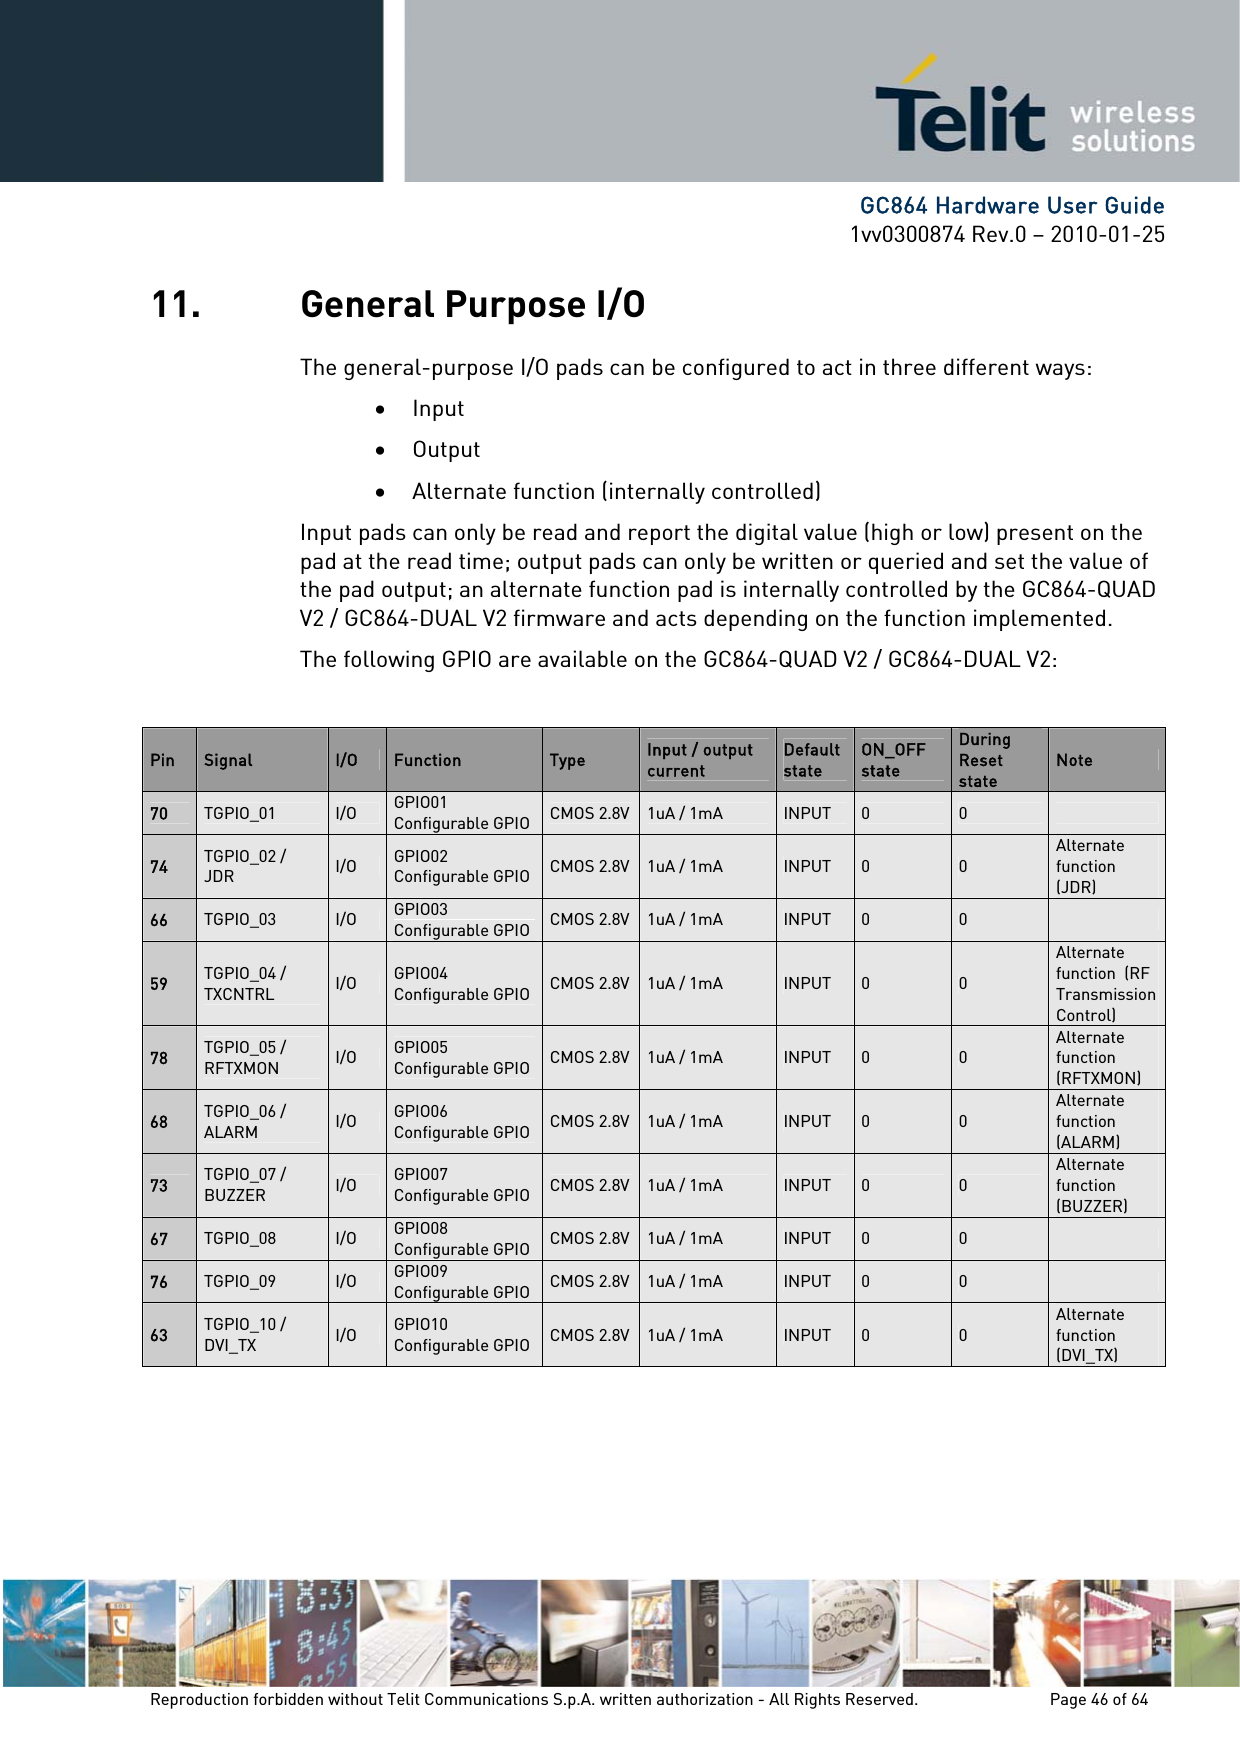      GC864 Hardware User Guide 1vv0300874 Rev.0 – 2010-01-25 Reproduction forbidden without Telit Communications S.p.A. written authorization - All Rights Reserved.    Page 46 of 64  11. General Purpose I/O The general-purpose I/O pads can be configured to act in three different ways: • Input • Output • Alternate function (internally controlled) Input pads can only be read and report the digital value (high or low) present on the pad at the read time; output pads can only be written or queried and set the value of the pad output; an alternate function pad is internally controlled by the GC864-QUAD V2 / GC864-DUAL V2 firmware and acts depending on the function implemented.  The following GPIO are available on the GC864-QUAD V2 / GC864-DUAL V2:  Pin  Signal  I/O  Function  Type  Input / output current Default state ON_OFF state During Reset state Note 70  TGPIO_01  I/O  GPIO01 Configurable GPIO  CMOS 2.8V 1uA / 1mA  INPUT  0  0   74  TGPIO_02 / JDR  I/O  GPIO02 Configurable GPIO  CMOS 2.8V 1uA / 1mA  INPUT  0  0 Alternate function  (JDR) 66  TGPIO_03  I/O  GPIO03 Configurable GPIO  CMOS 2.8V 1uA / 1mA  INPUT  0  0   59  TGPIO_04 / TXCNTRL  I/O  GPIO04 Configurable GPIO  CMOS 2.8V 1uA / 1mA  INPUT  0  0 Alternate function  (RF Transmission Control) 78  TGPIO_05 / RFTXMON  I/O  GPIO05 Configurable GPIO  CMOS 2.8V 1uA / 1mA  INPUT  0  0 Alternate function (RFTXMON) 68  TGPIO_06 / ALARM  I/O  GPIO06 Configurable GPIO  CMOS 2.8V 1uA / 1mA  INPUT  0  0 Alternate function (ALARM) 73  TGPIO_07 / BUZZER  I/O  GPIO07 Configurable GPIO  CMOS 2.8V 1uA / 1mA  INPUT  0  0 Alternate function (BUZZER) 67  TGPIO_08  I/O  GPIO08 Configurable GPIO  CMOS 2.8V 1uA / 1mA  INPUT  0  0   76  TGPIO_09  I/O  GPIO09 Configurable GPIO  CMOS 2.8V 1uA / 1mA  INPUT  0  0   63  TGPIO_10 / DVI_TX  I/O  GPIO10 Configurable GPIO  CMOS 2.8V 1uA / 1mA  INPUT  0  0 Alternate function (DVI_TX)  